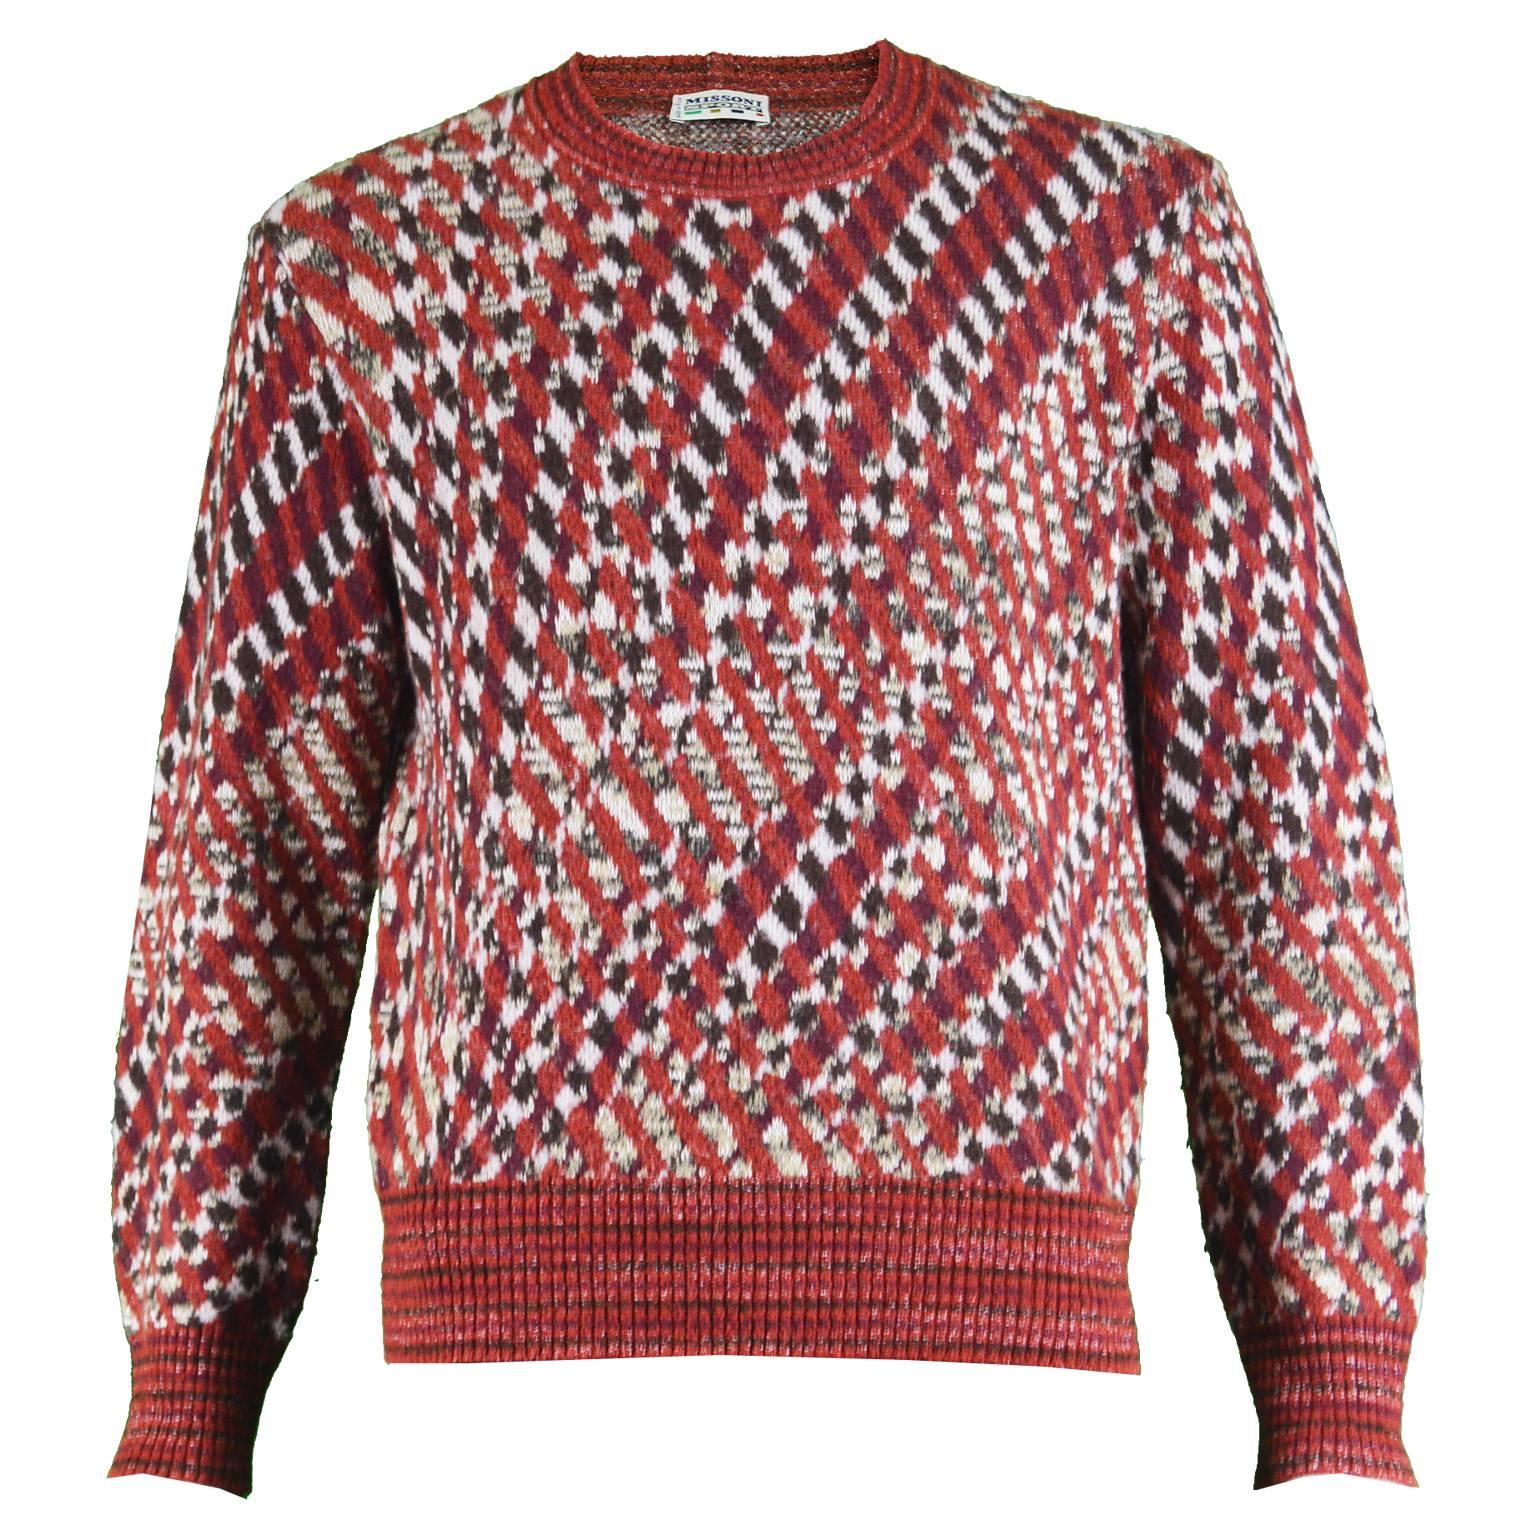  Missoni Men's Vintage 1980s Red Patterned Wool Rayon & Mohair Blend Sweater For Sale